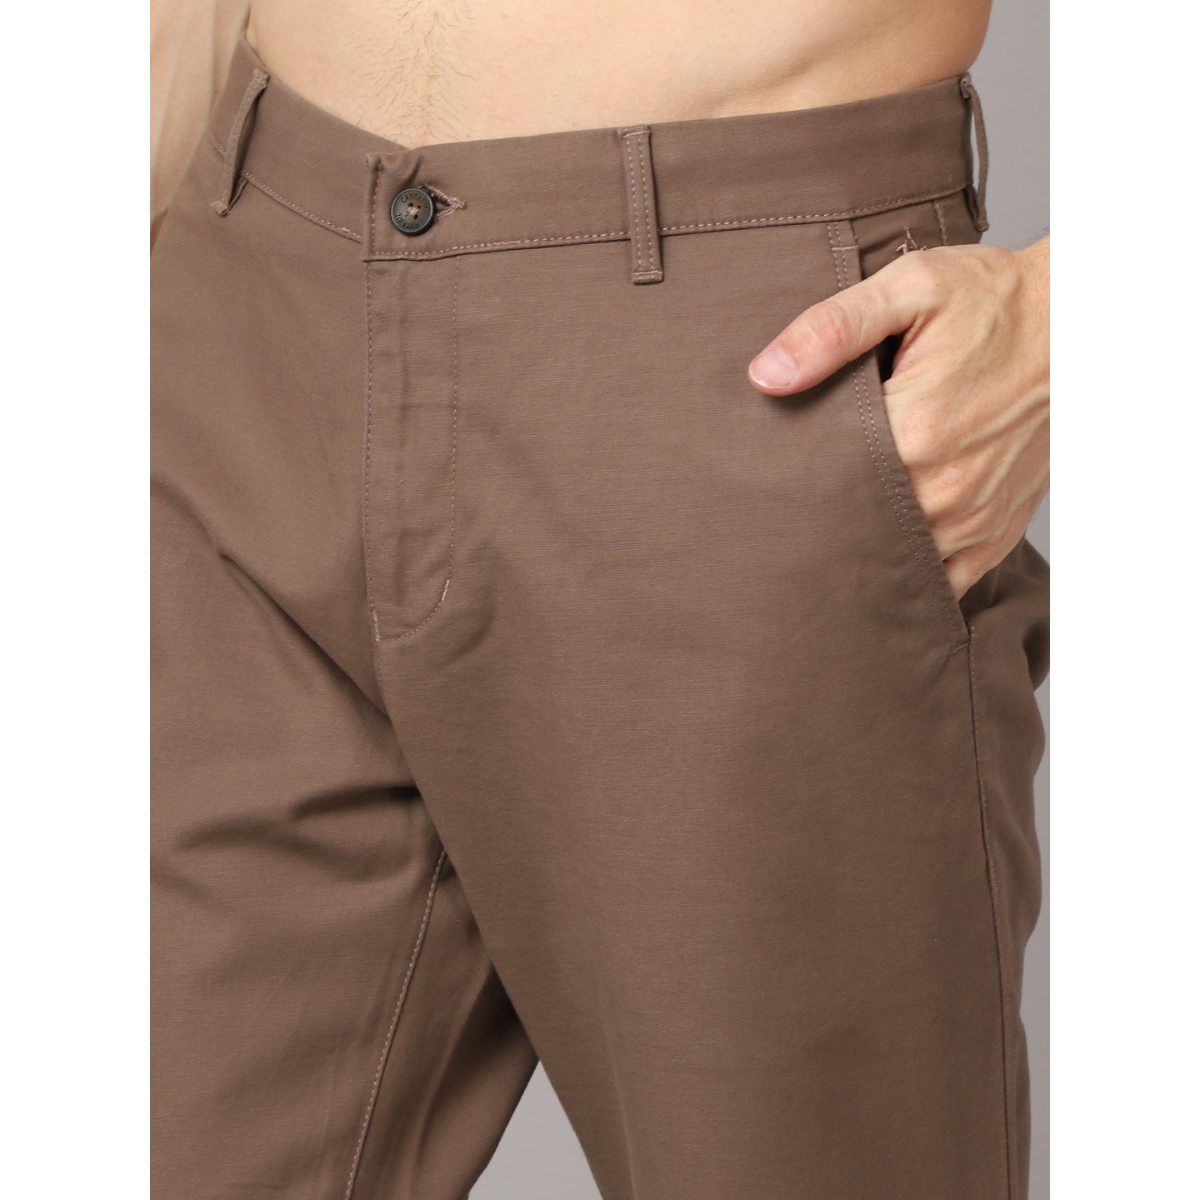 Light brown trousers for man PT S/S - Rione Fontana